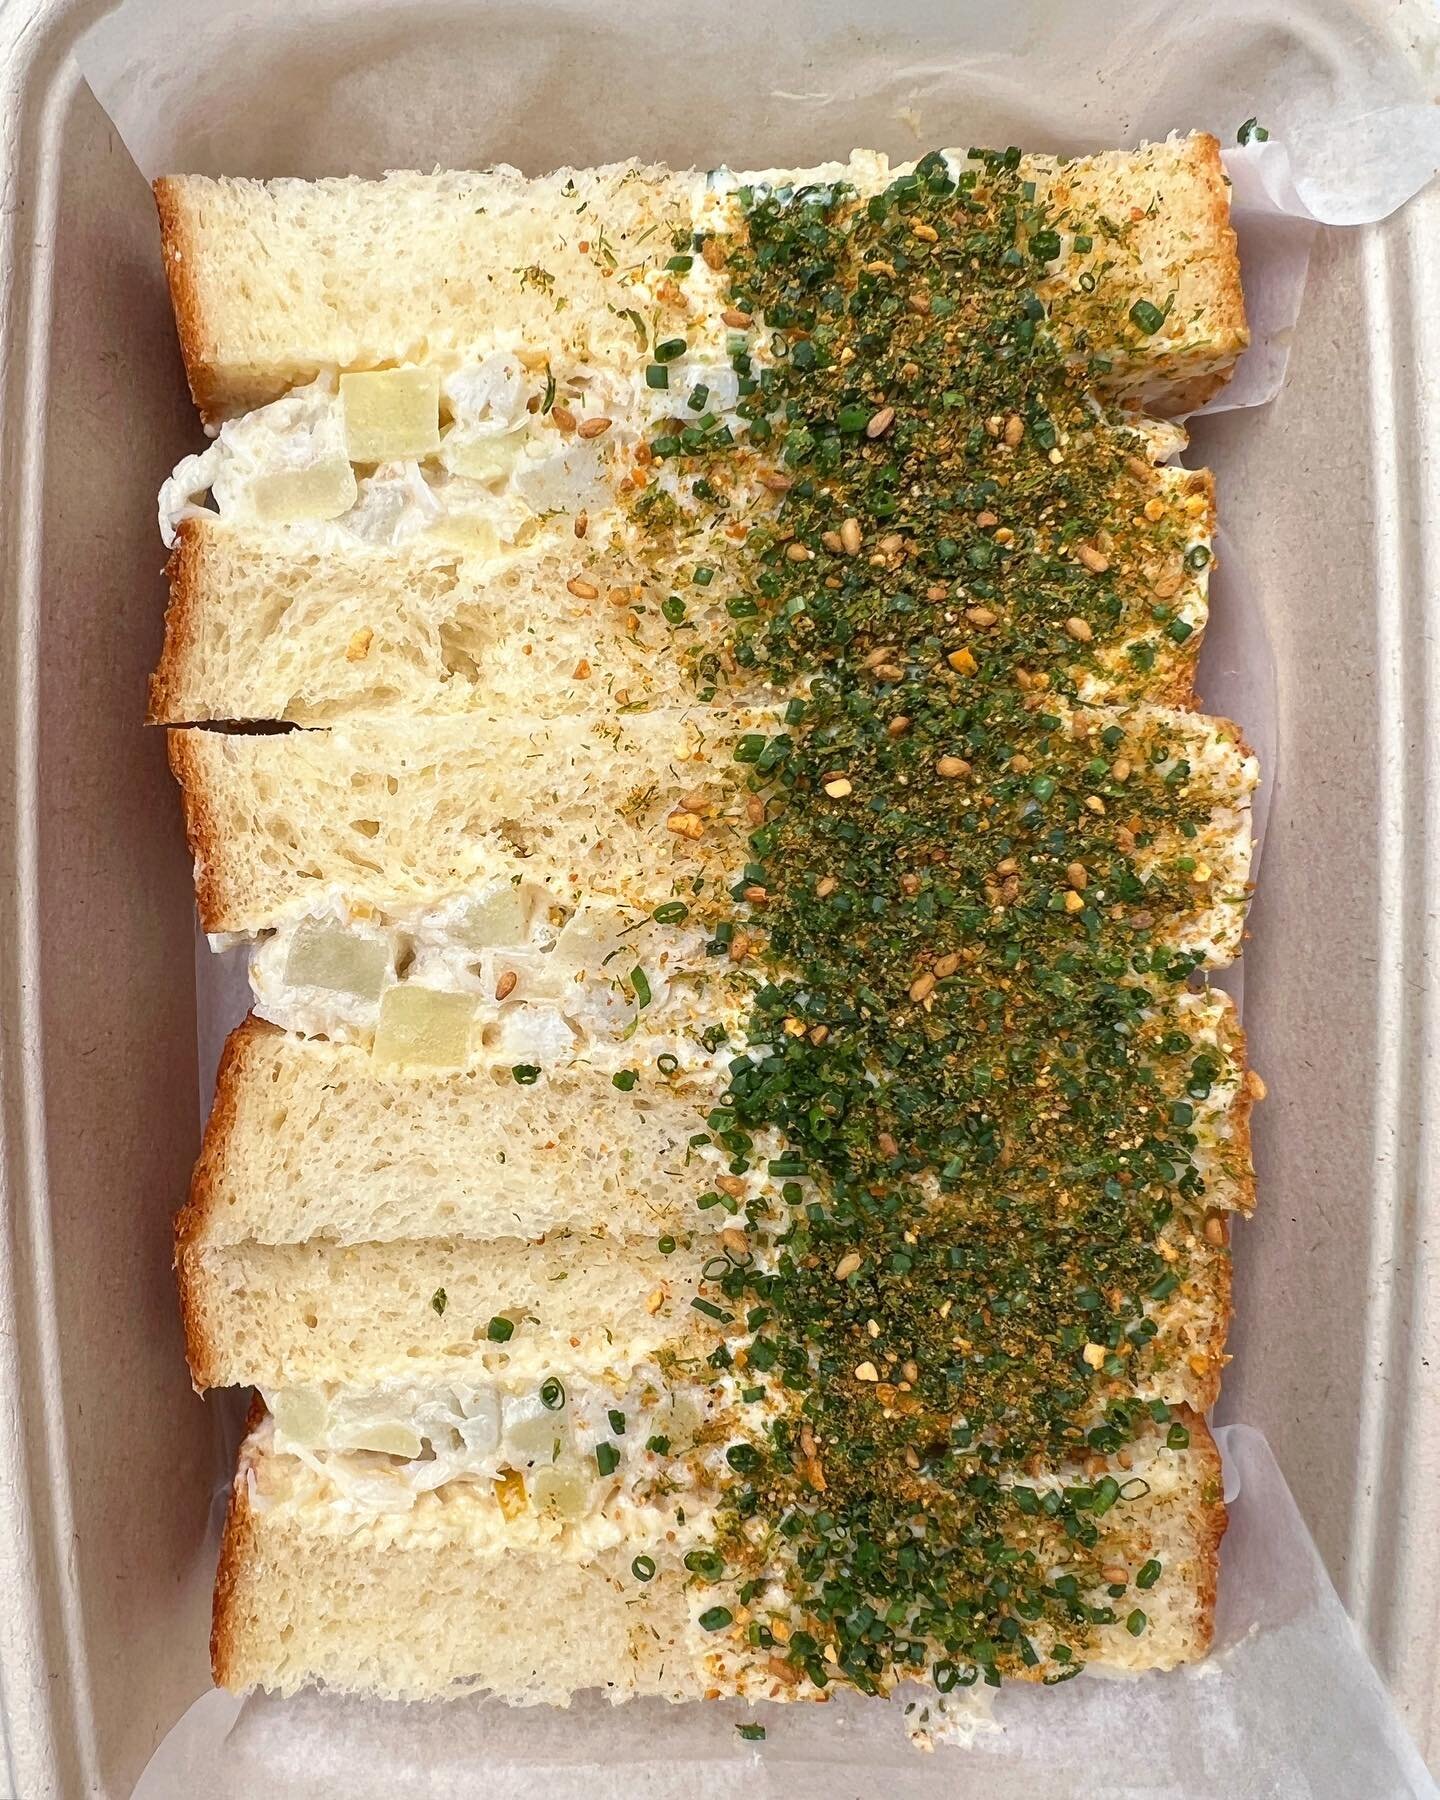 Nothin&rsquo; shabby about this crabby! Rain or shine, we&rsquo;re on snack duty all weekend long, so come see us before you spend the day inside!! 
Cali Dungeness 🦀 , 🥔 salad, 🧄-crab fat mayo, shichimi yuzu togarashi on Breadbelly milk bread 🍞. 